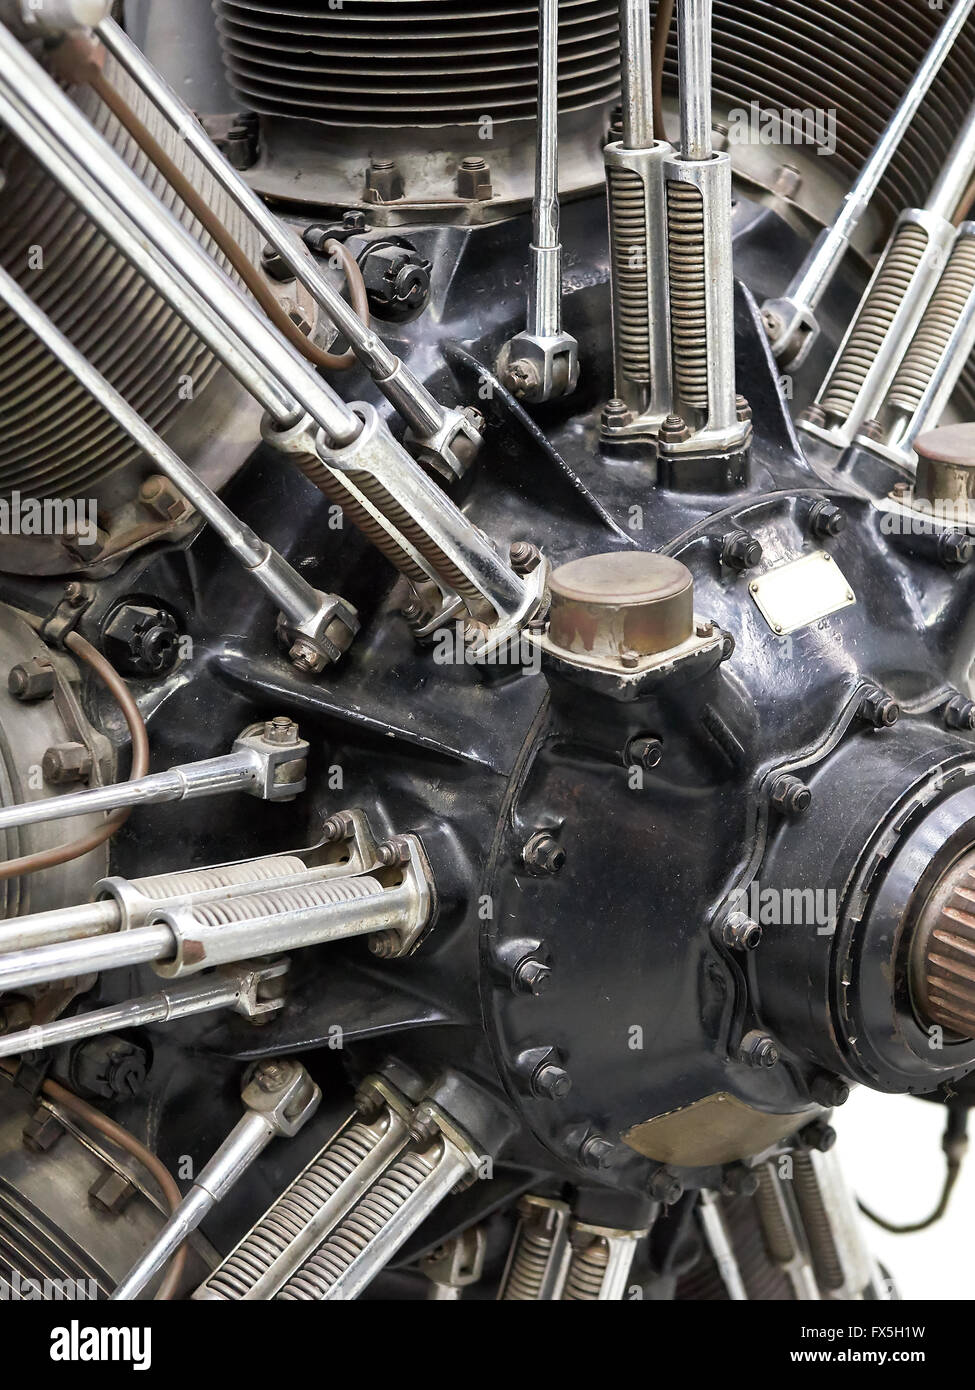 Closeup image of an old airplane star engine Stock Photo